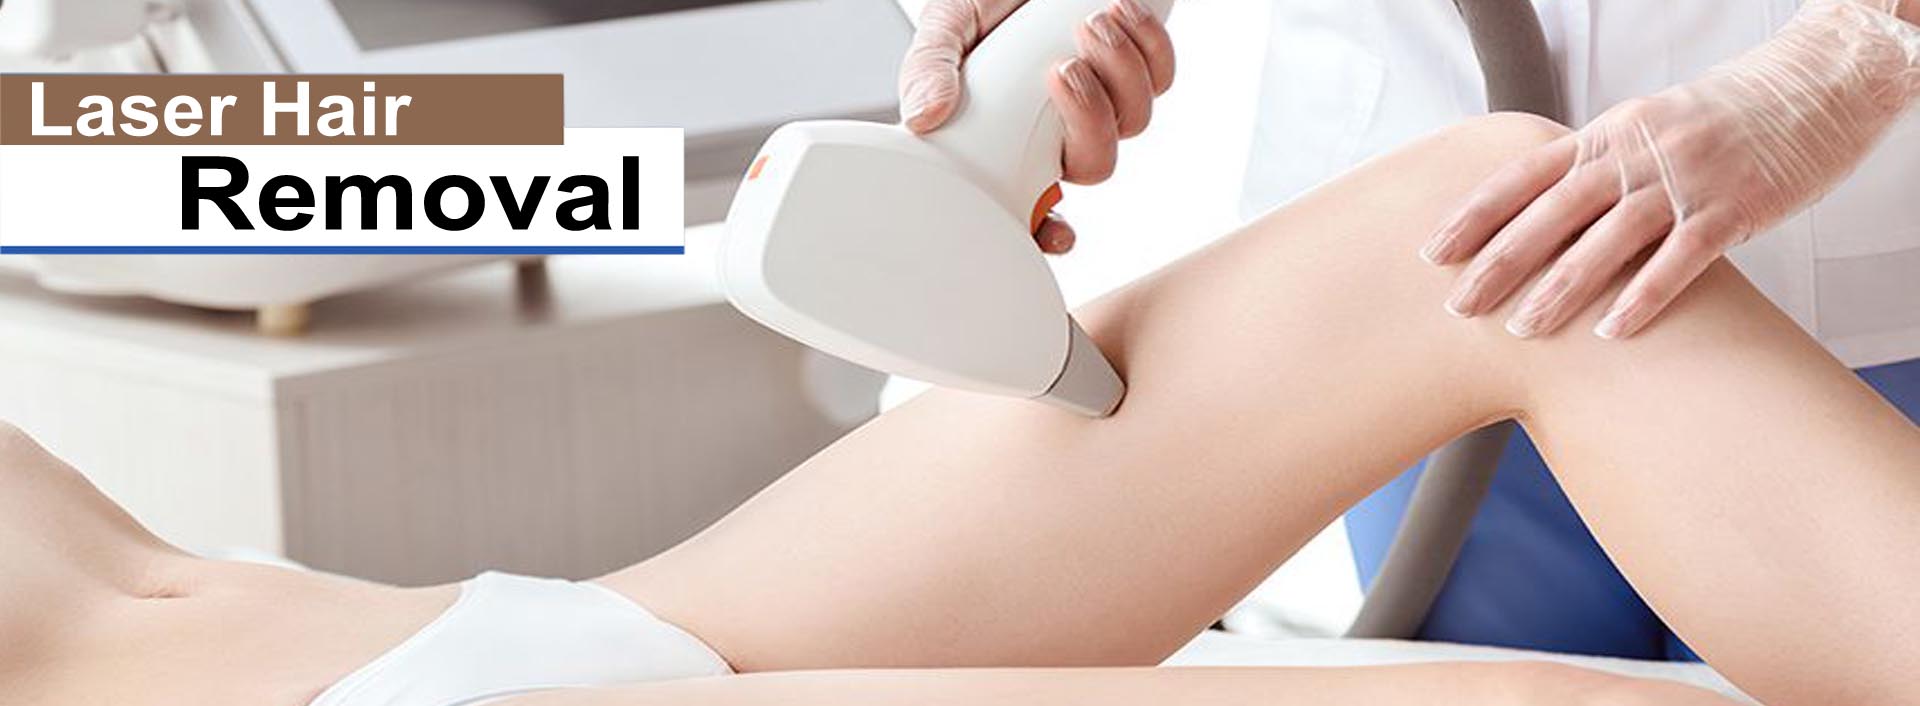 Best Laser Hair Removal Treatment Clinic in Gurgaon | Hair Doctor Cost